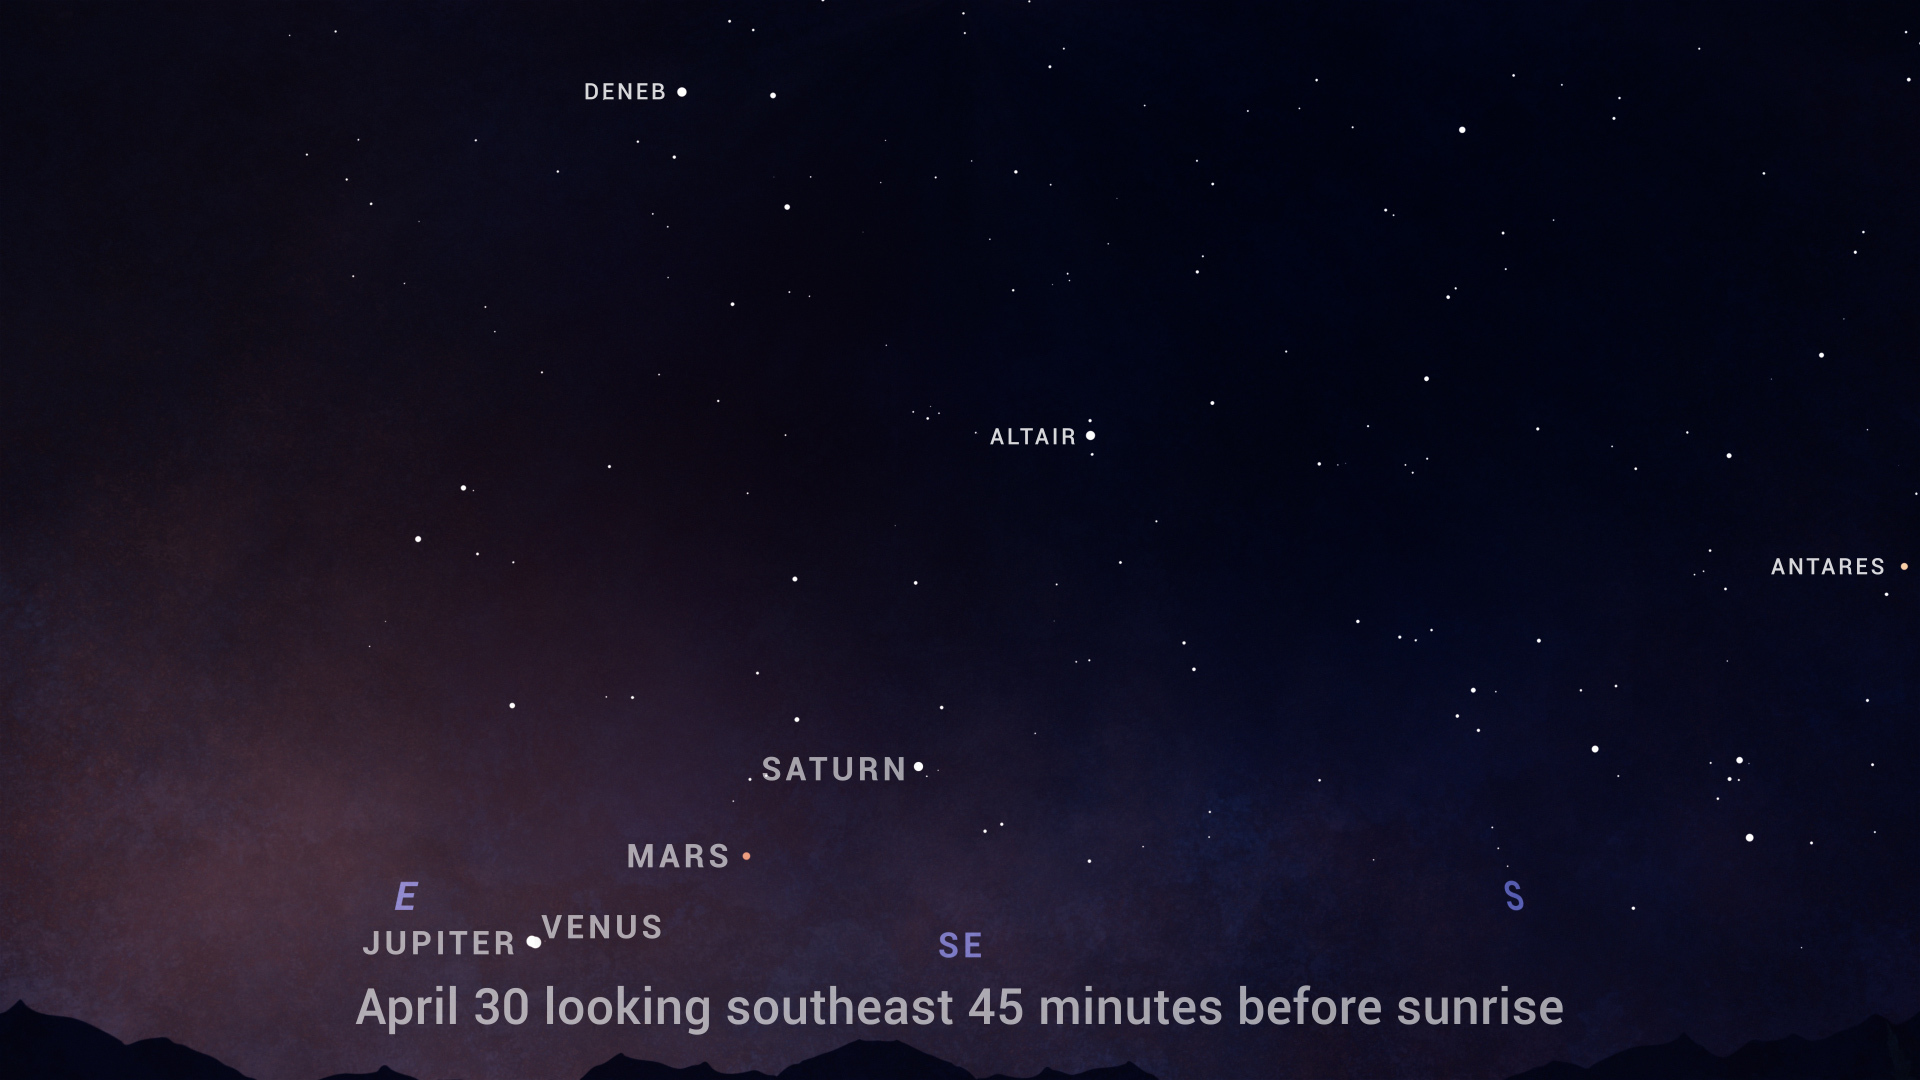 This sky chart shows the close conjunction of Venus and Jupiter before sunrise on April 30.